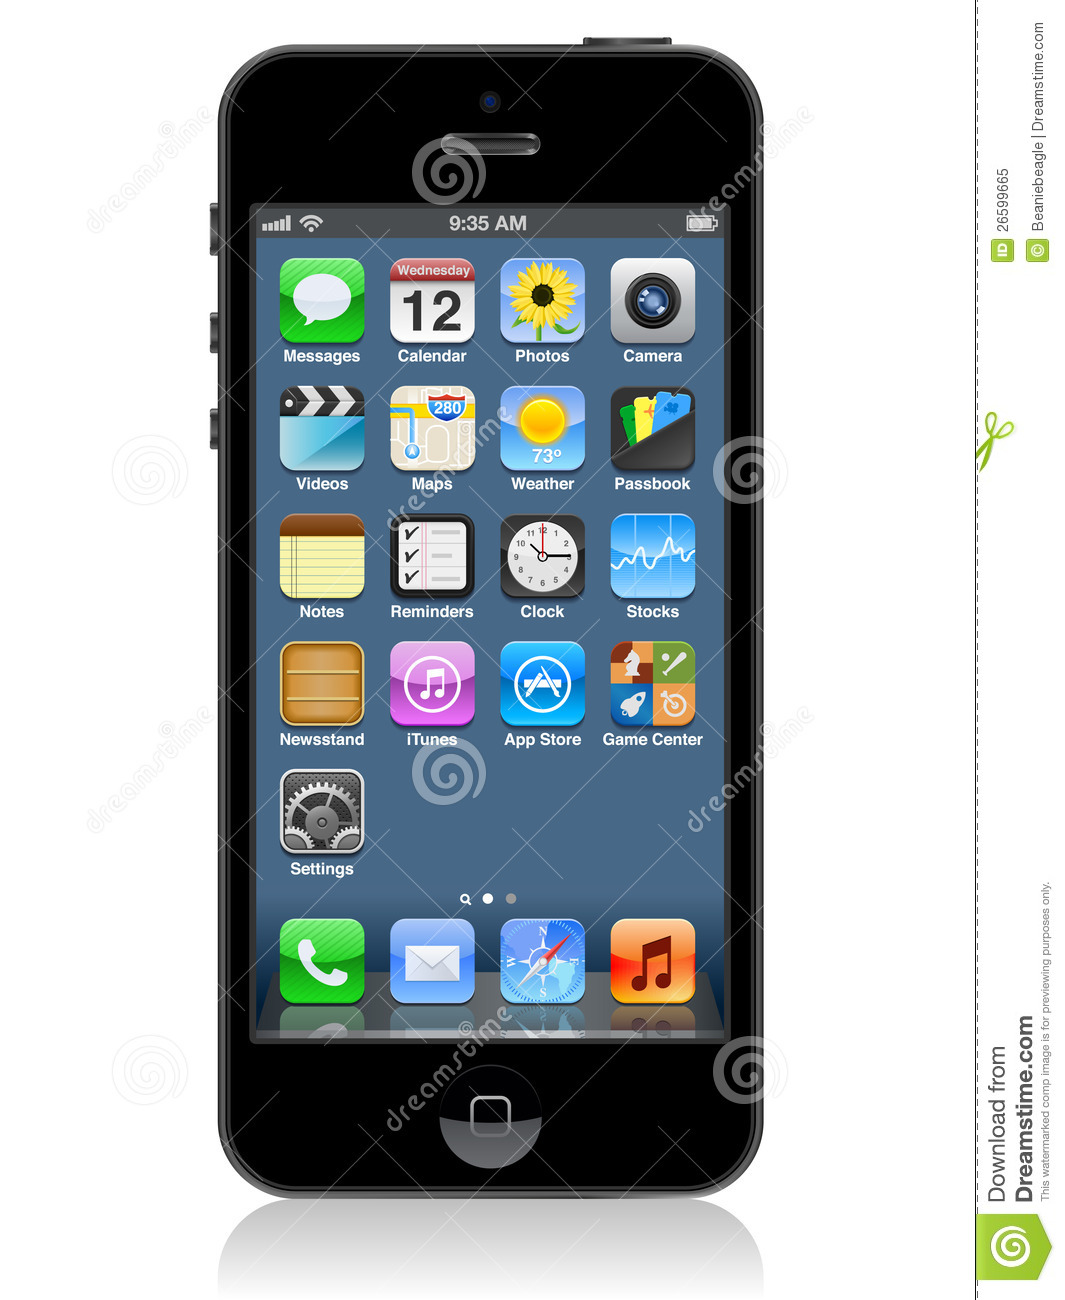 Vector Illustration Of The New Apple Iphone 5 Mr No Pr No 5 9960 196